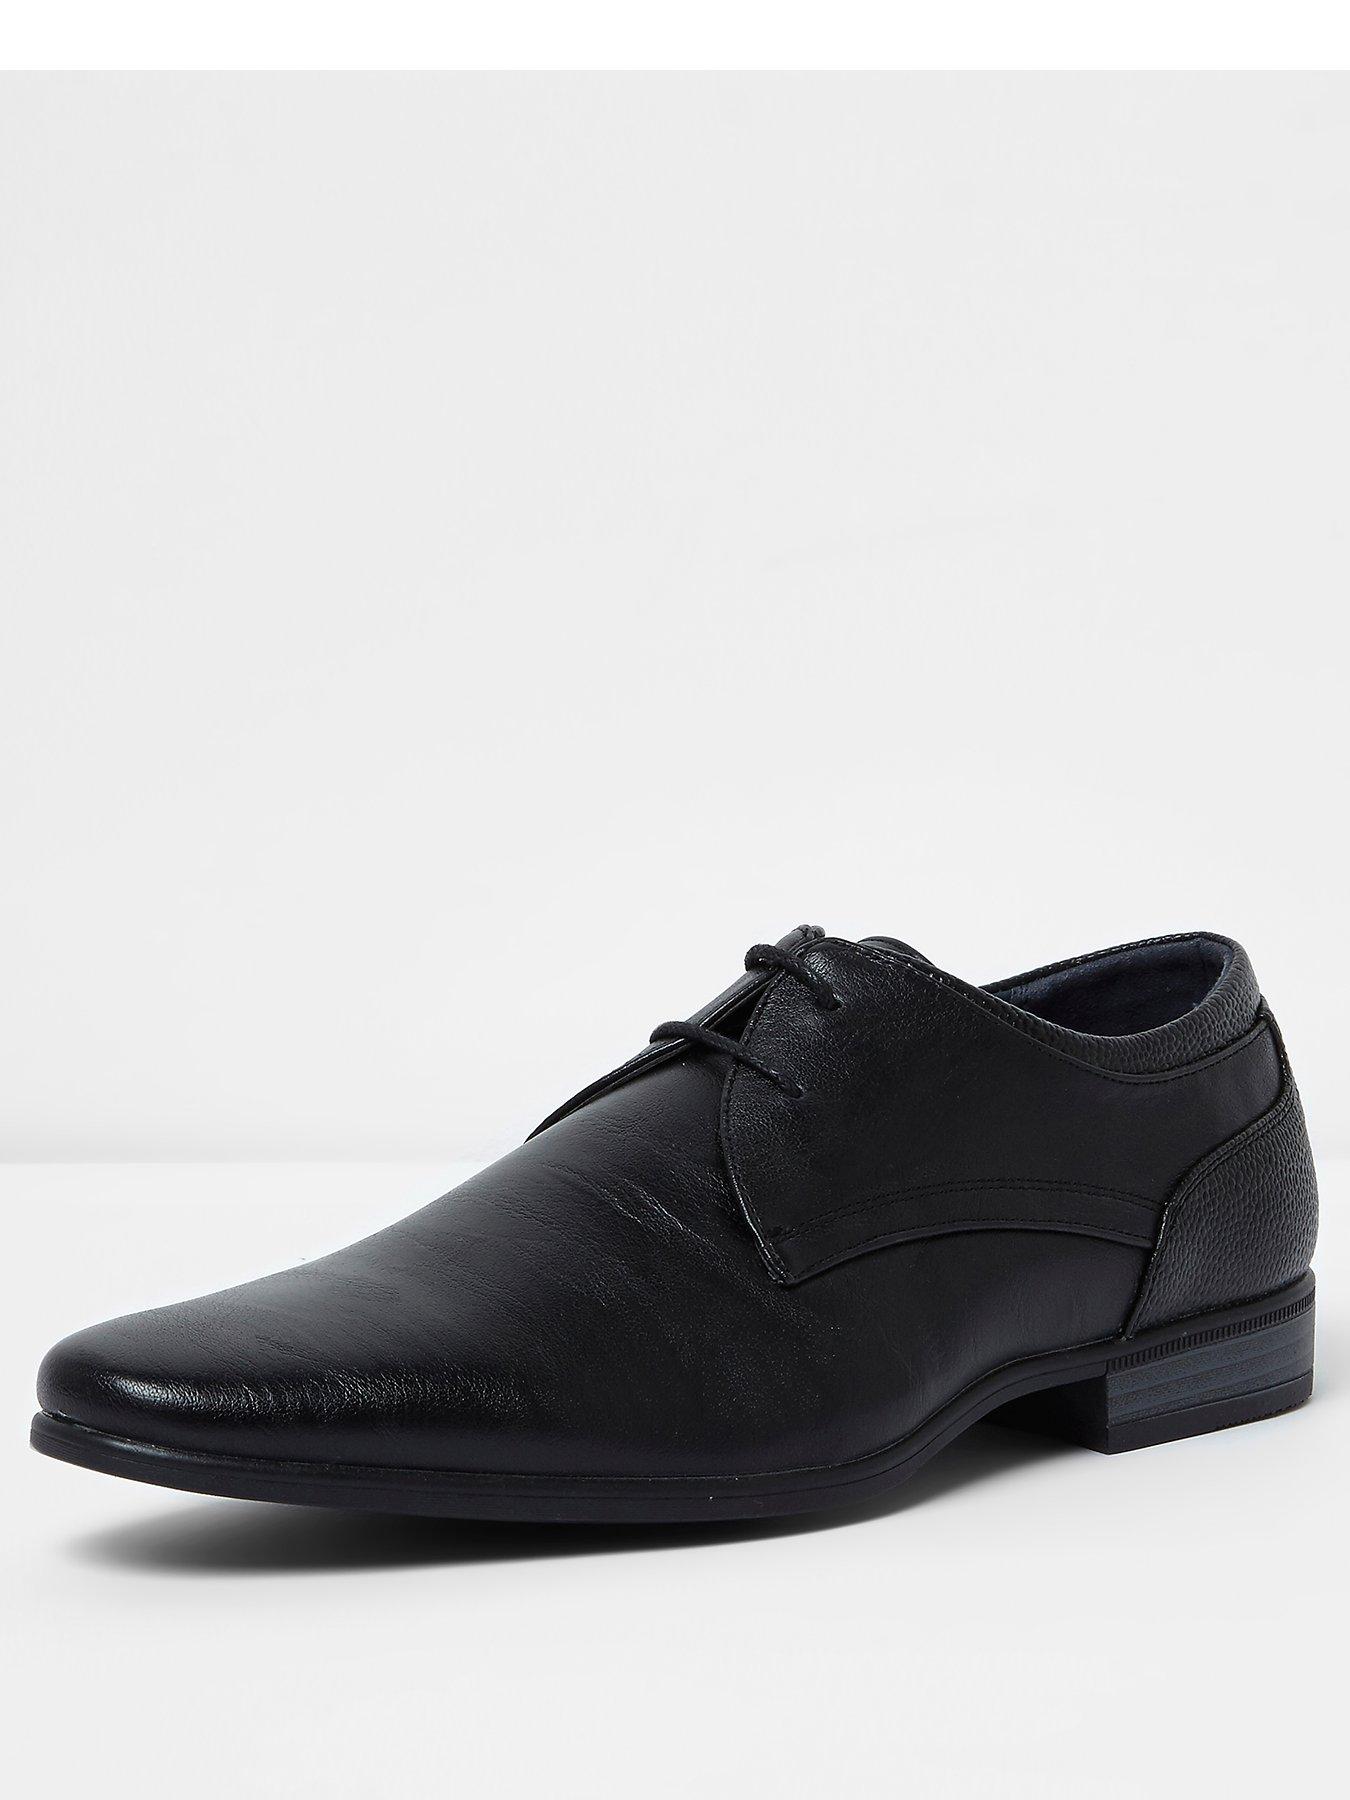 done deal mens shoes